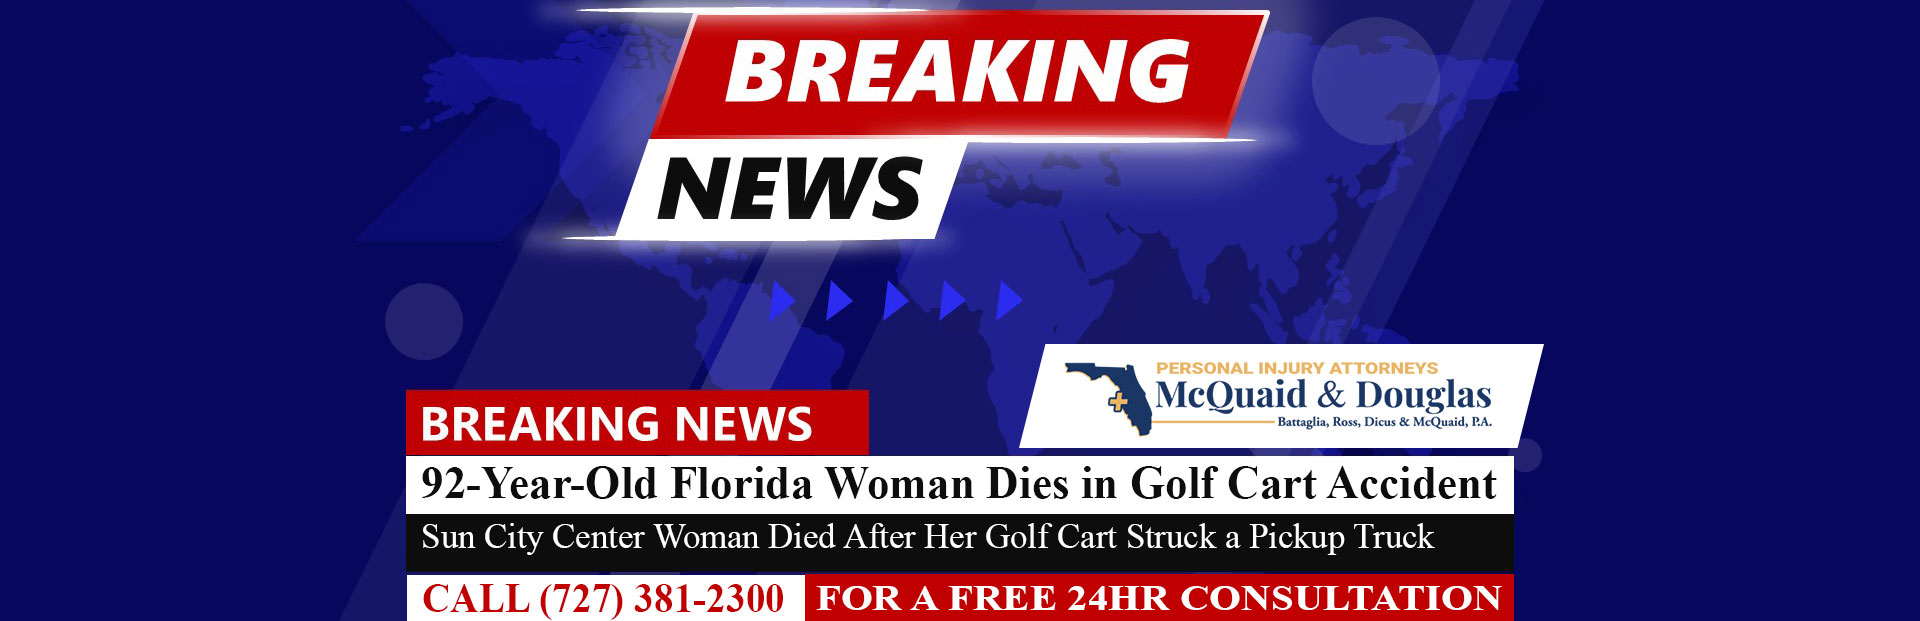 [7-18-22] 92-Year-Old Florida Woman Dies After Striking Pickup Truck With Her Golf Cart